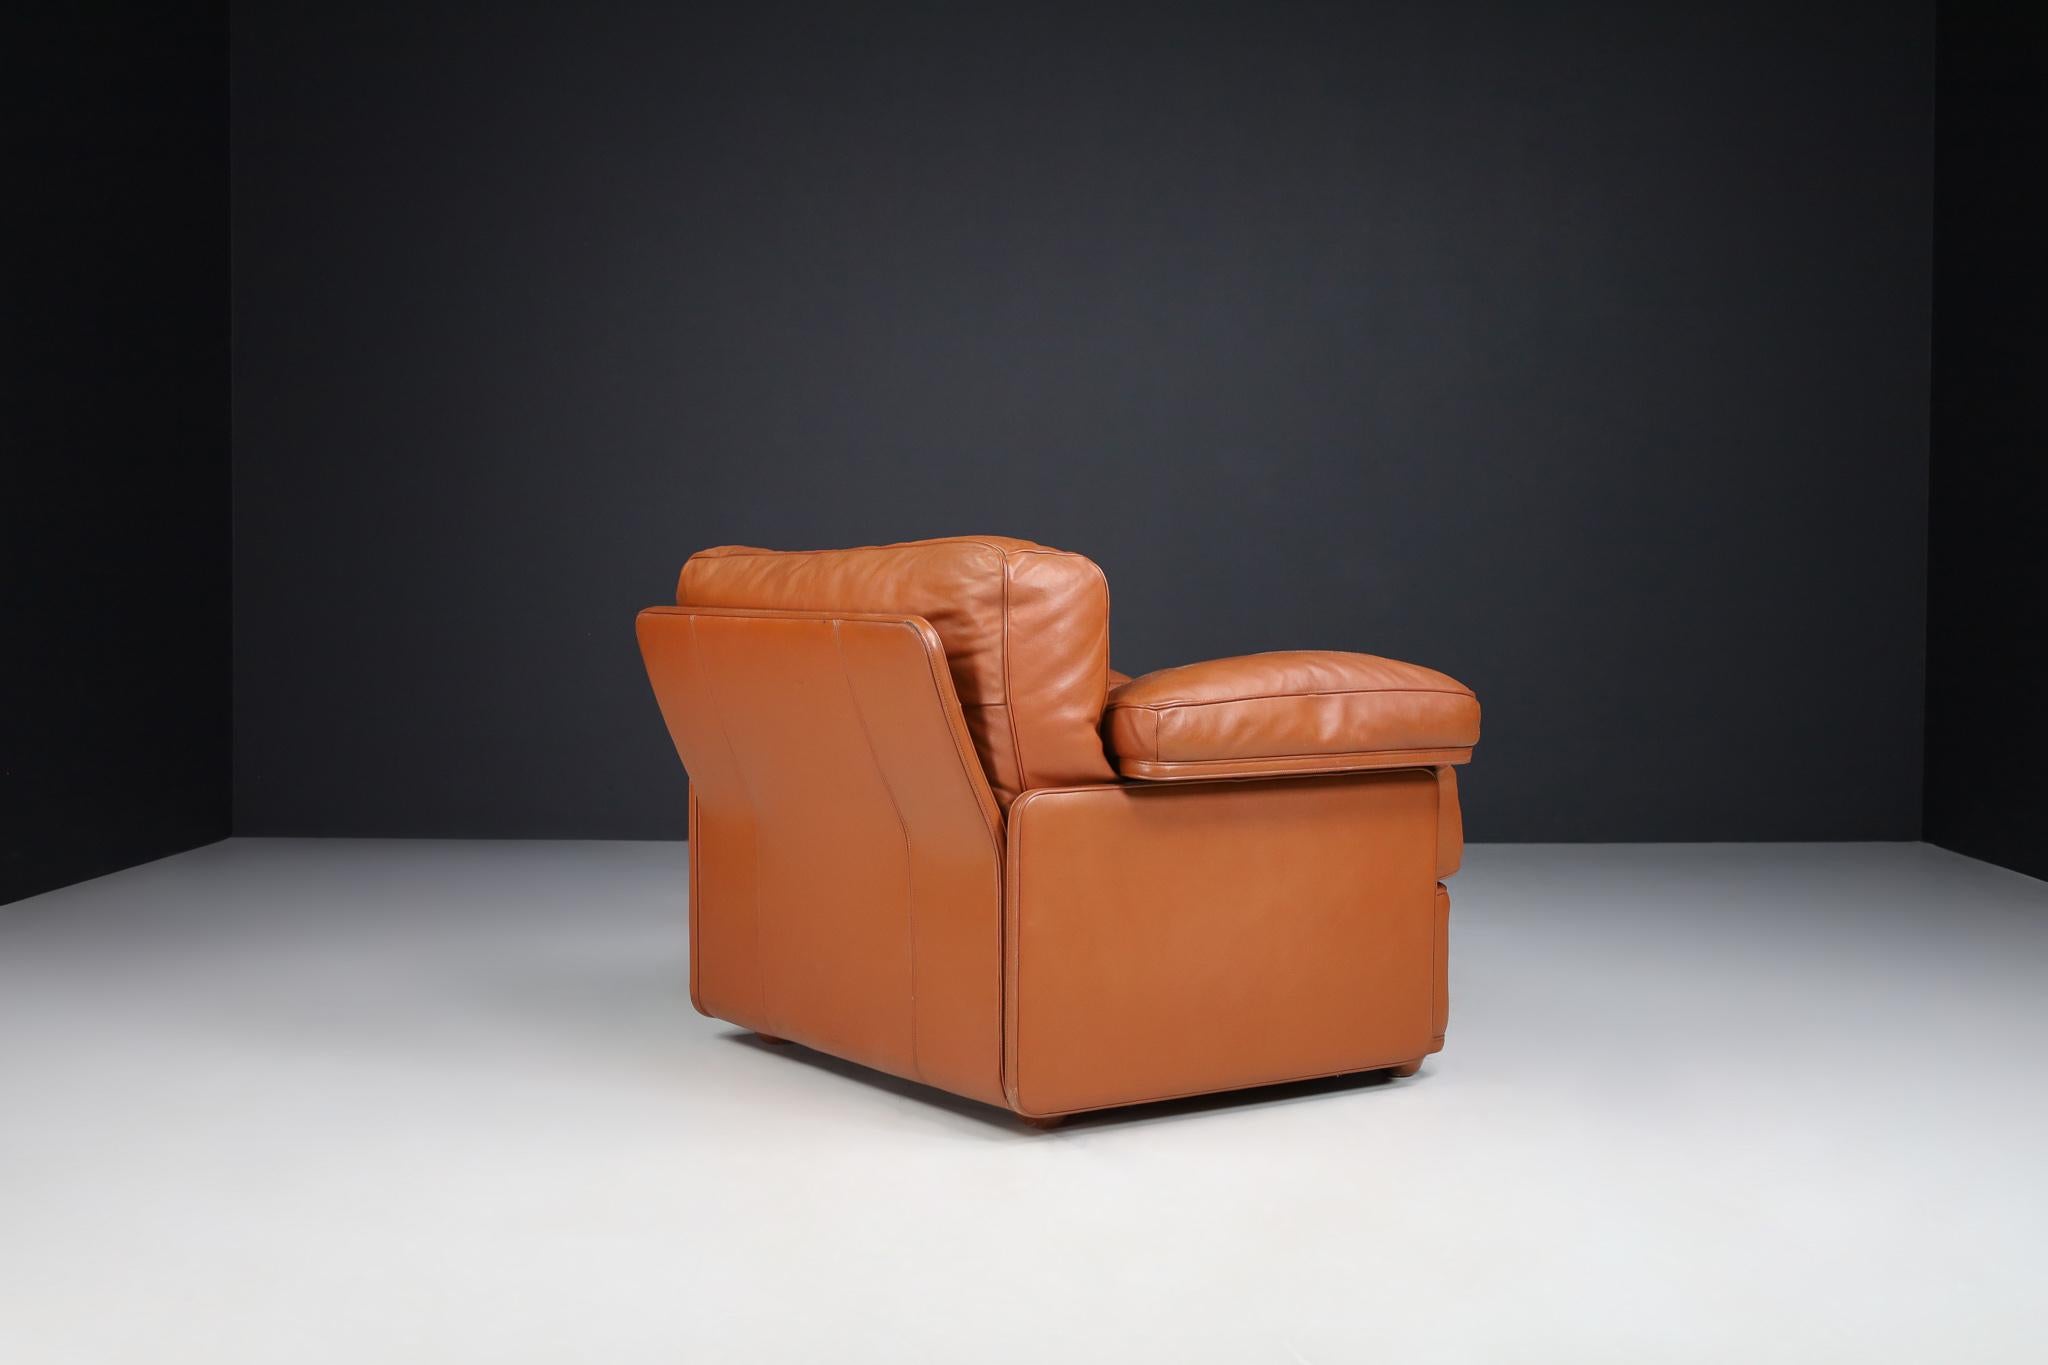 Tito Agnoli For Poltrona Frau Leather Lounge Chairs by, Italy 1970s In Good Condition For Sale In Almelo, NL